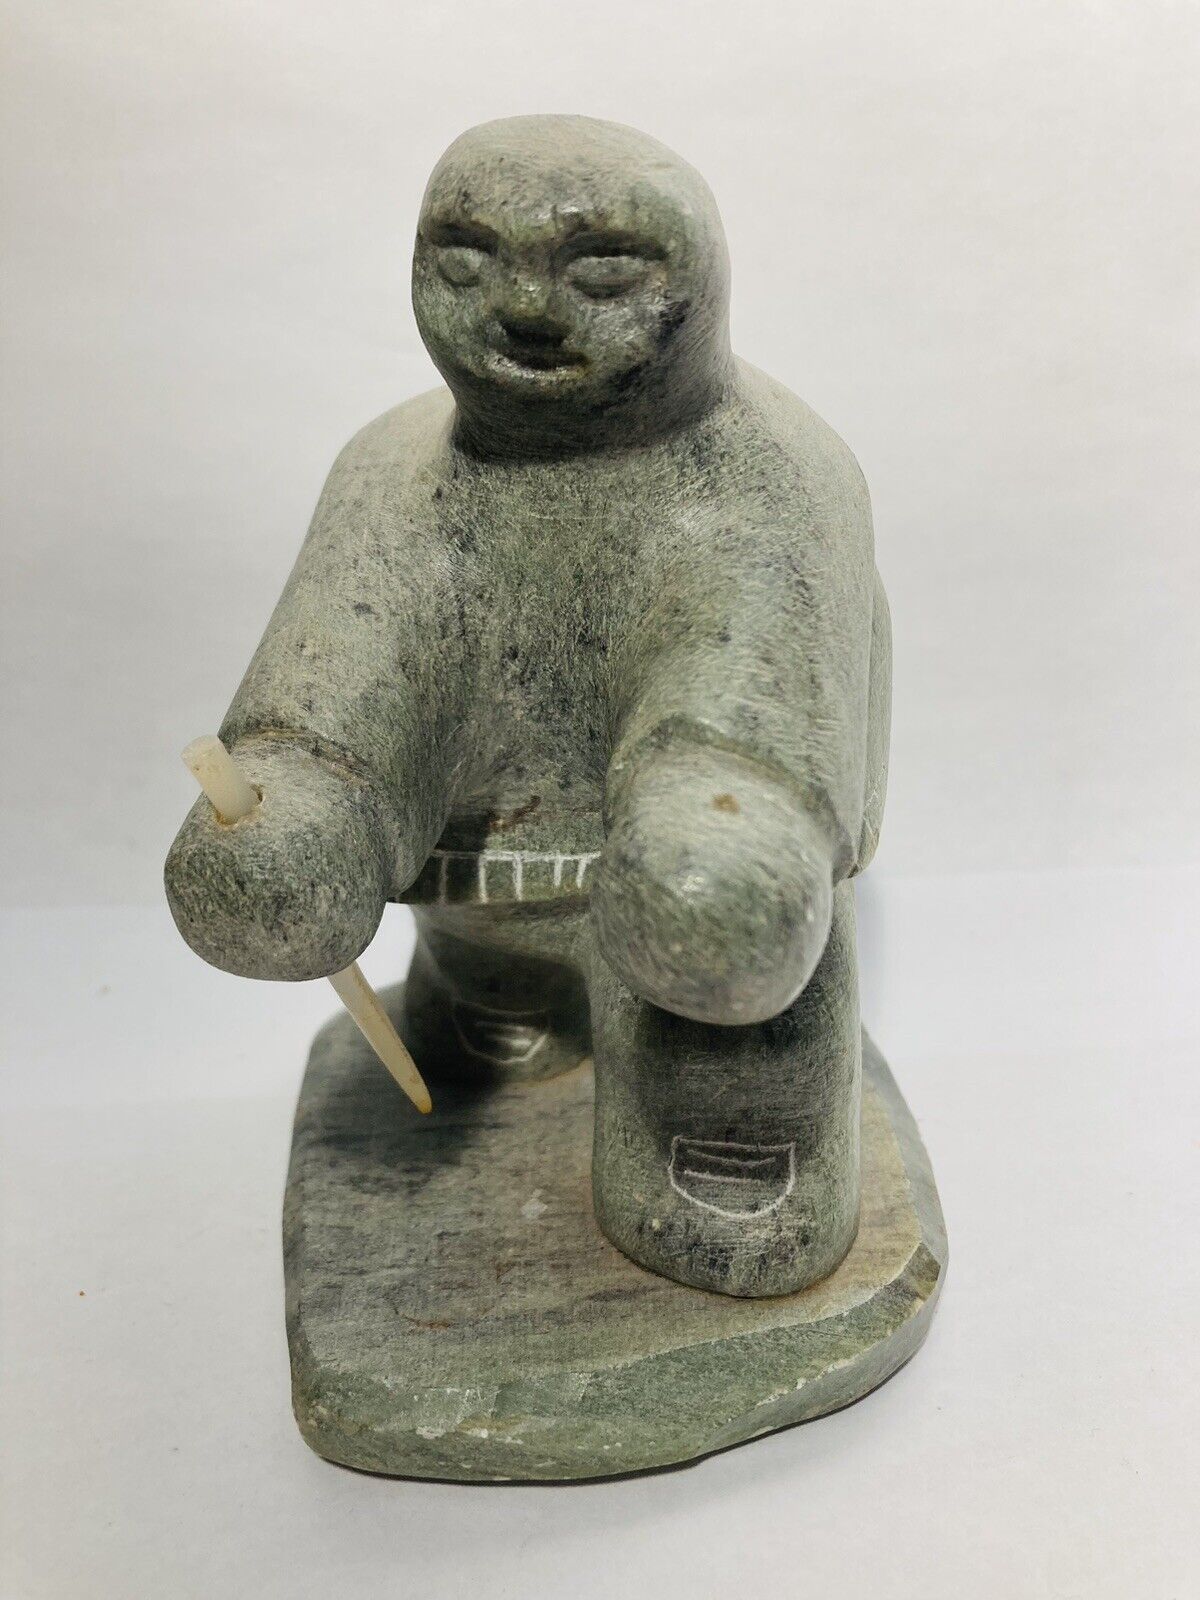 Inuit Soapstone Carving Seal Hunter 5” Tall Signed By DIMU Dieteich Muckenheim